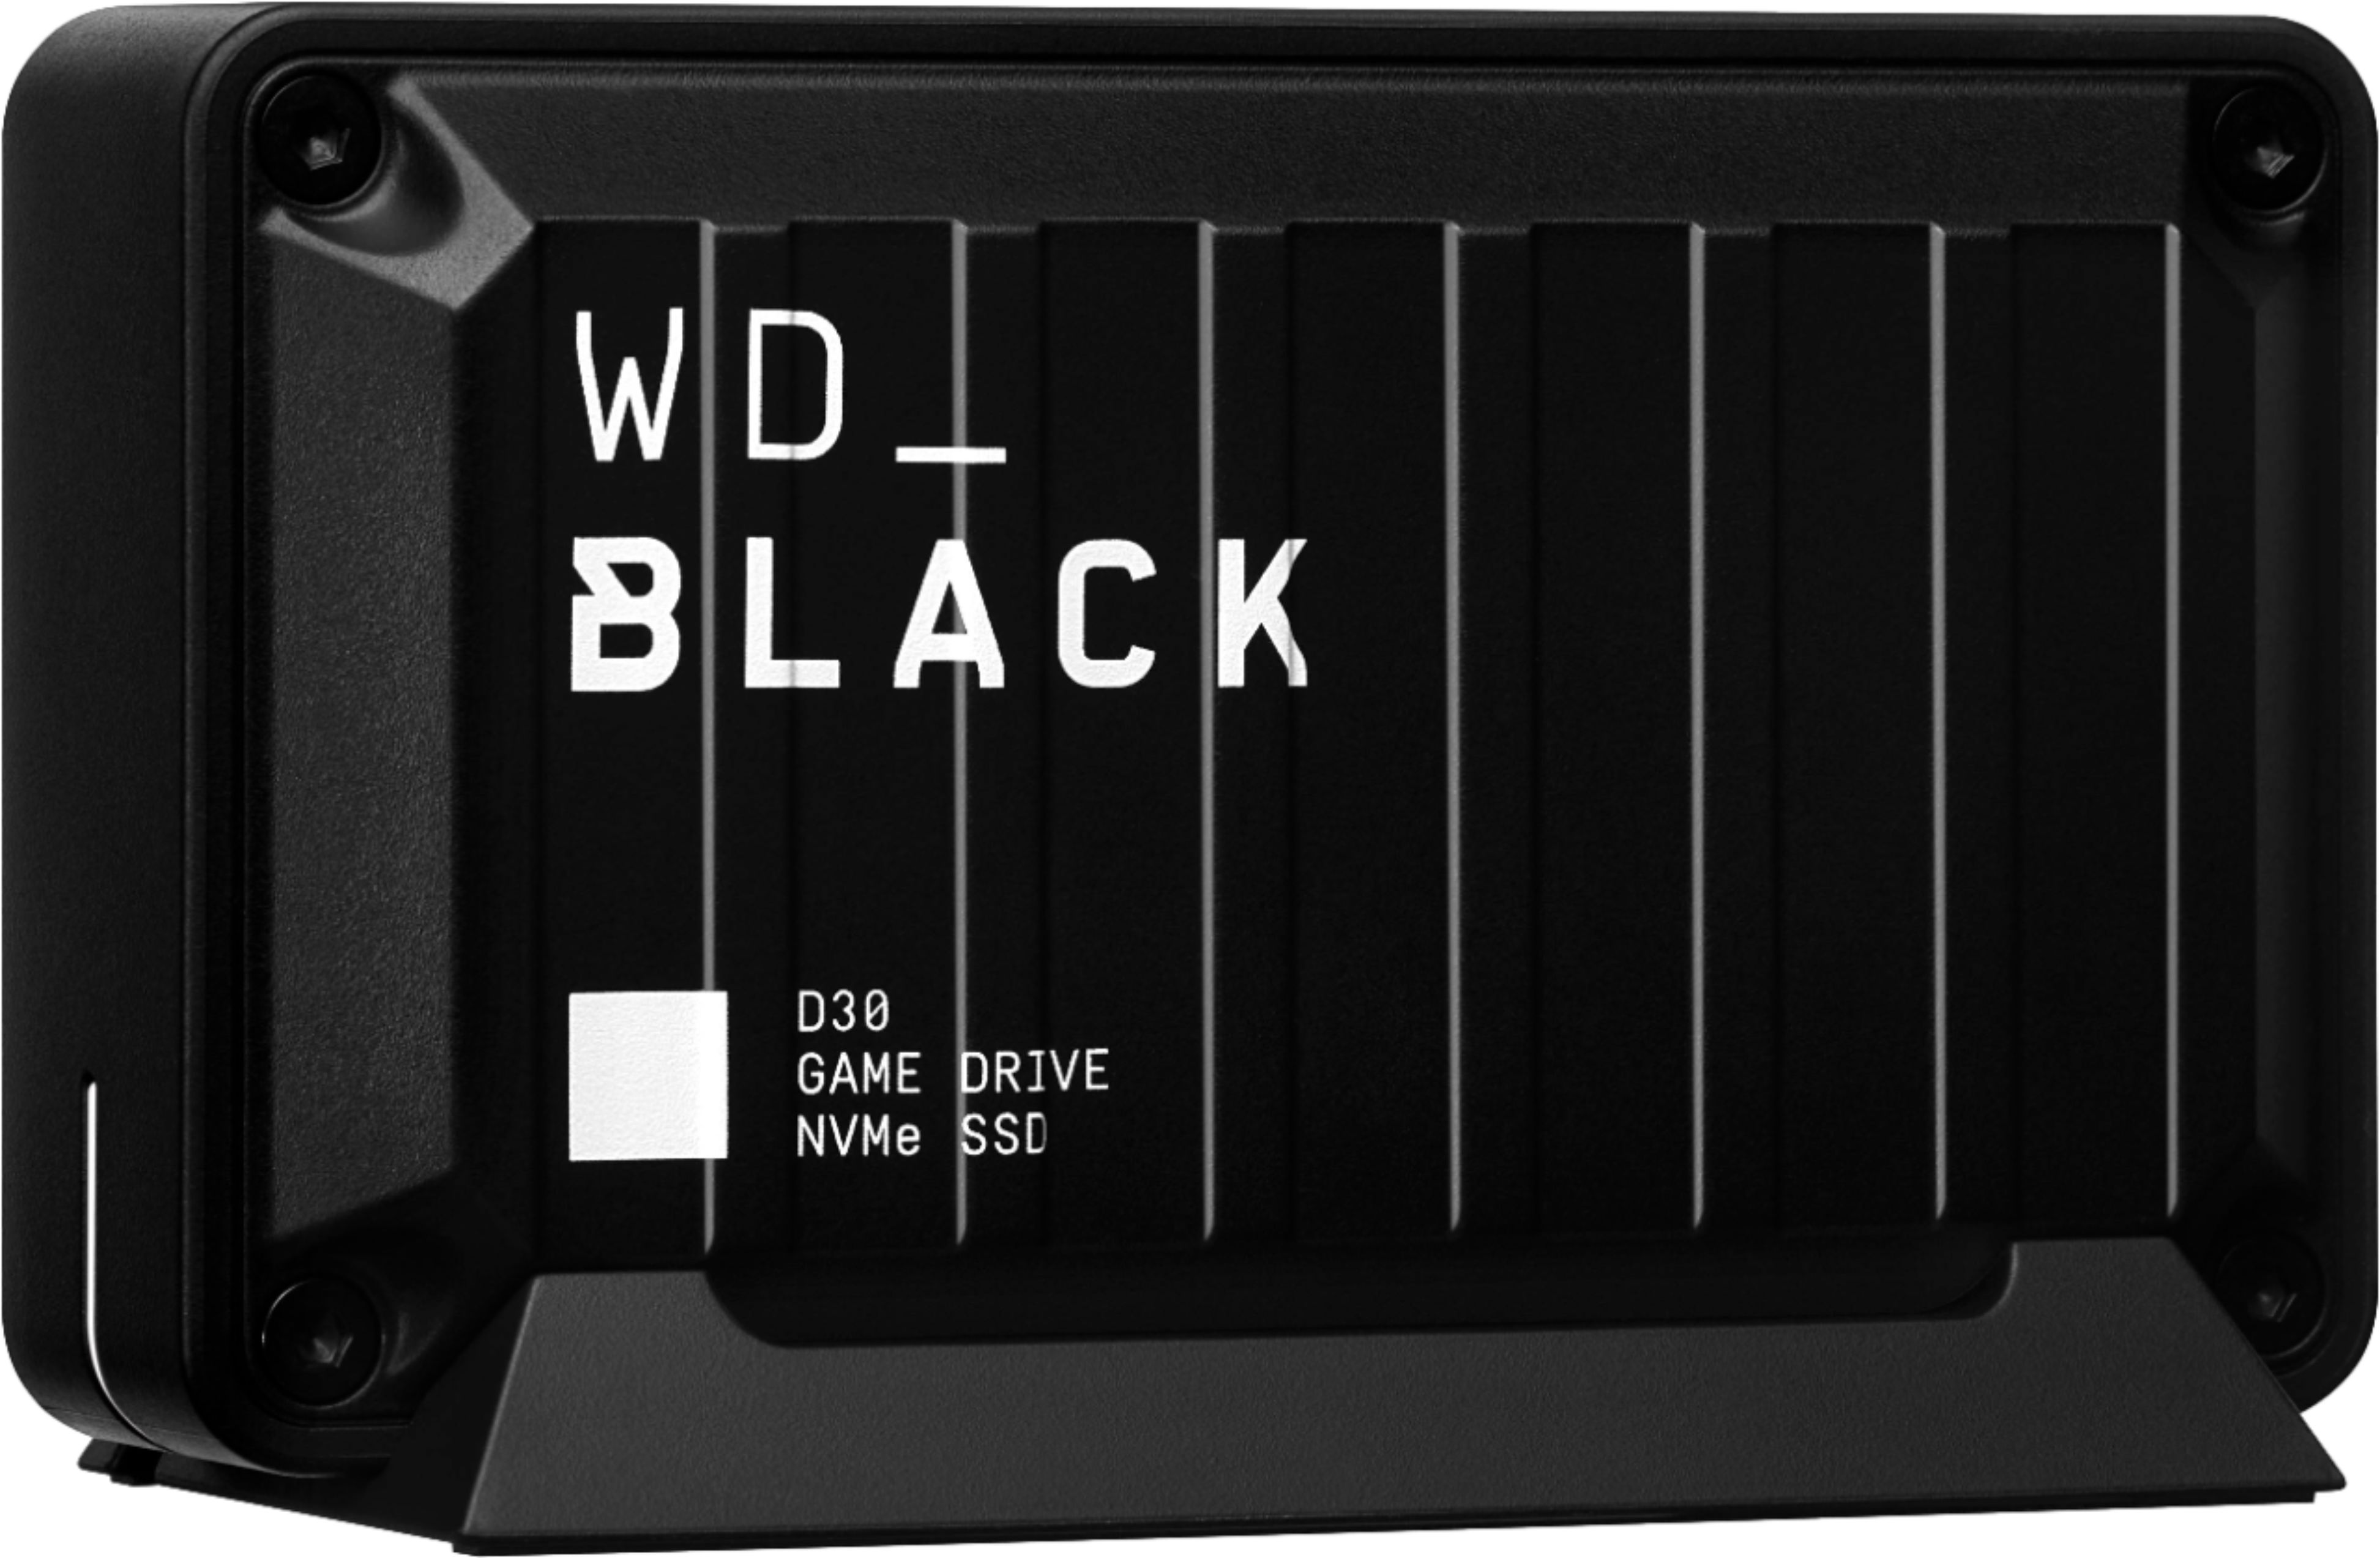 WD D30 2TB Drive for PlayStation and External USB Portable SSD Black WDBATL0020BBK-WESN - Best Buy